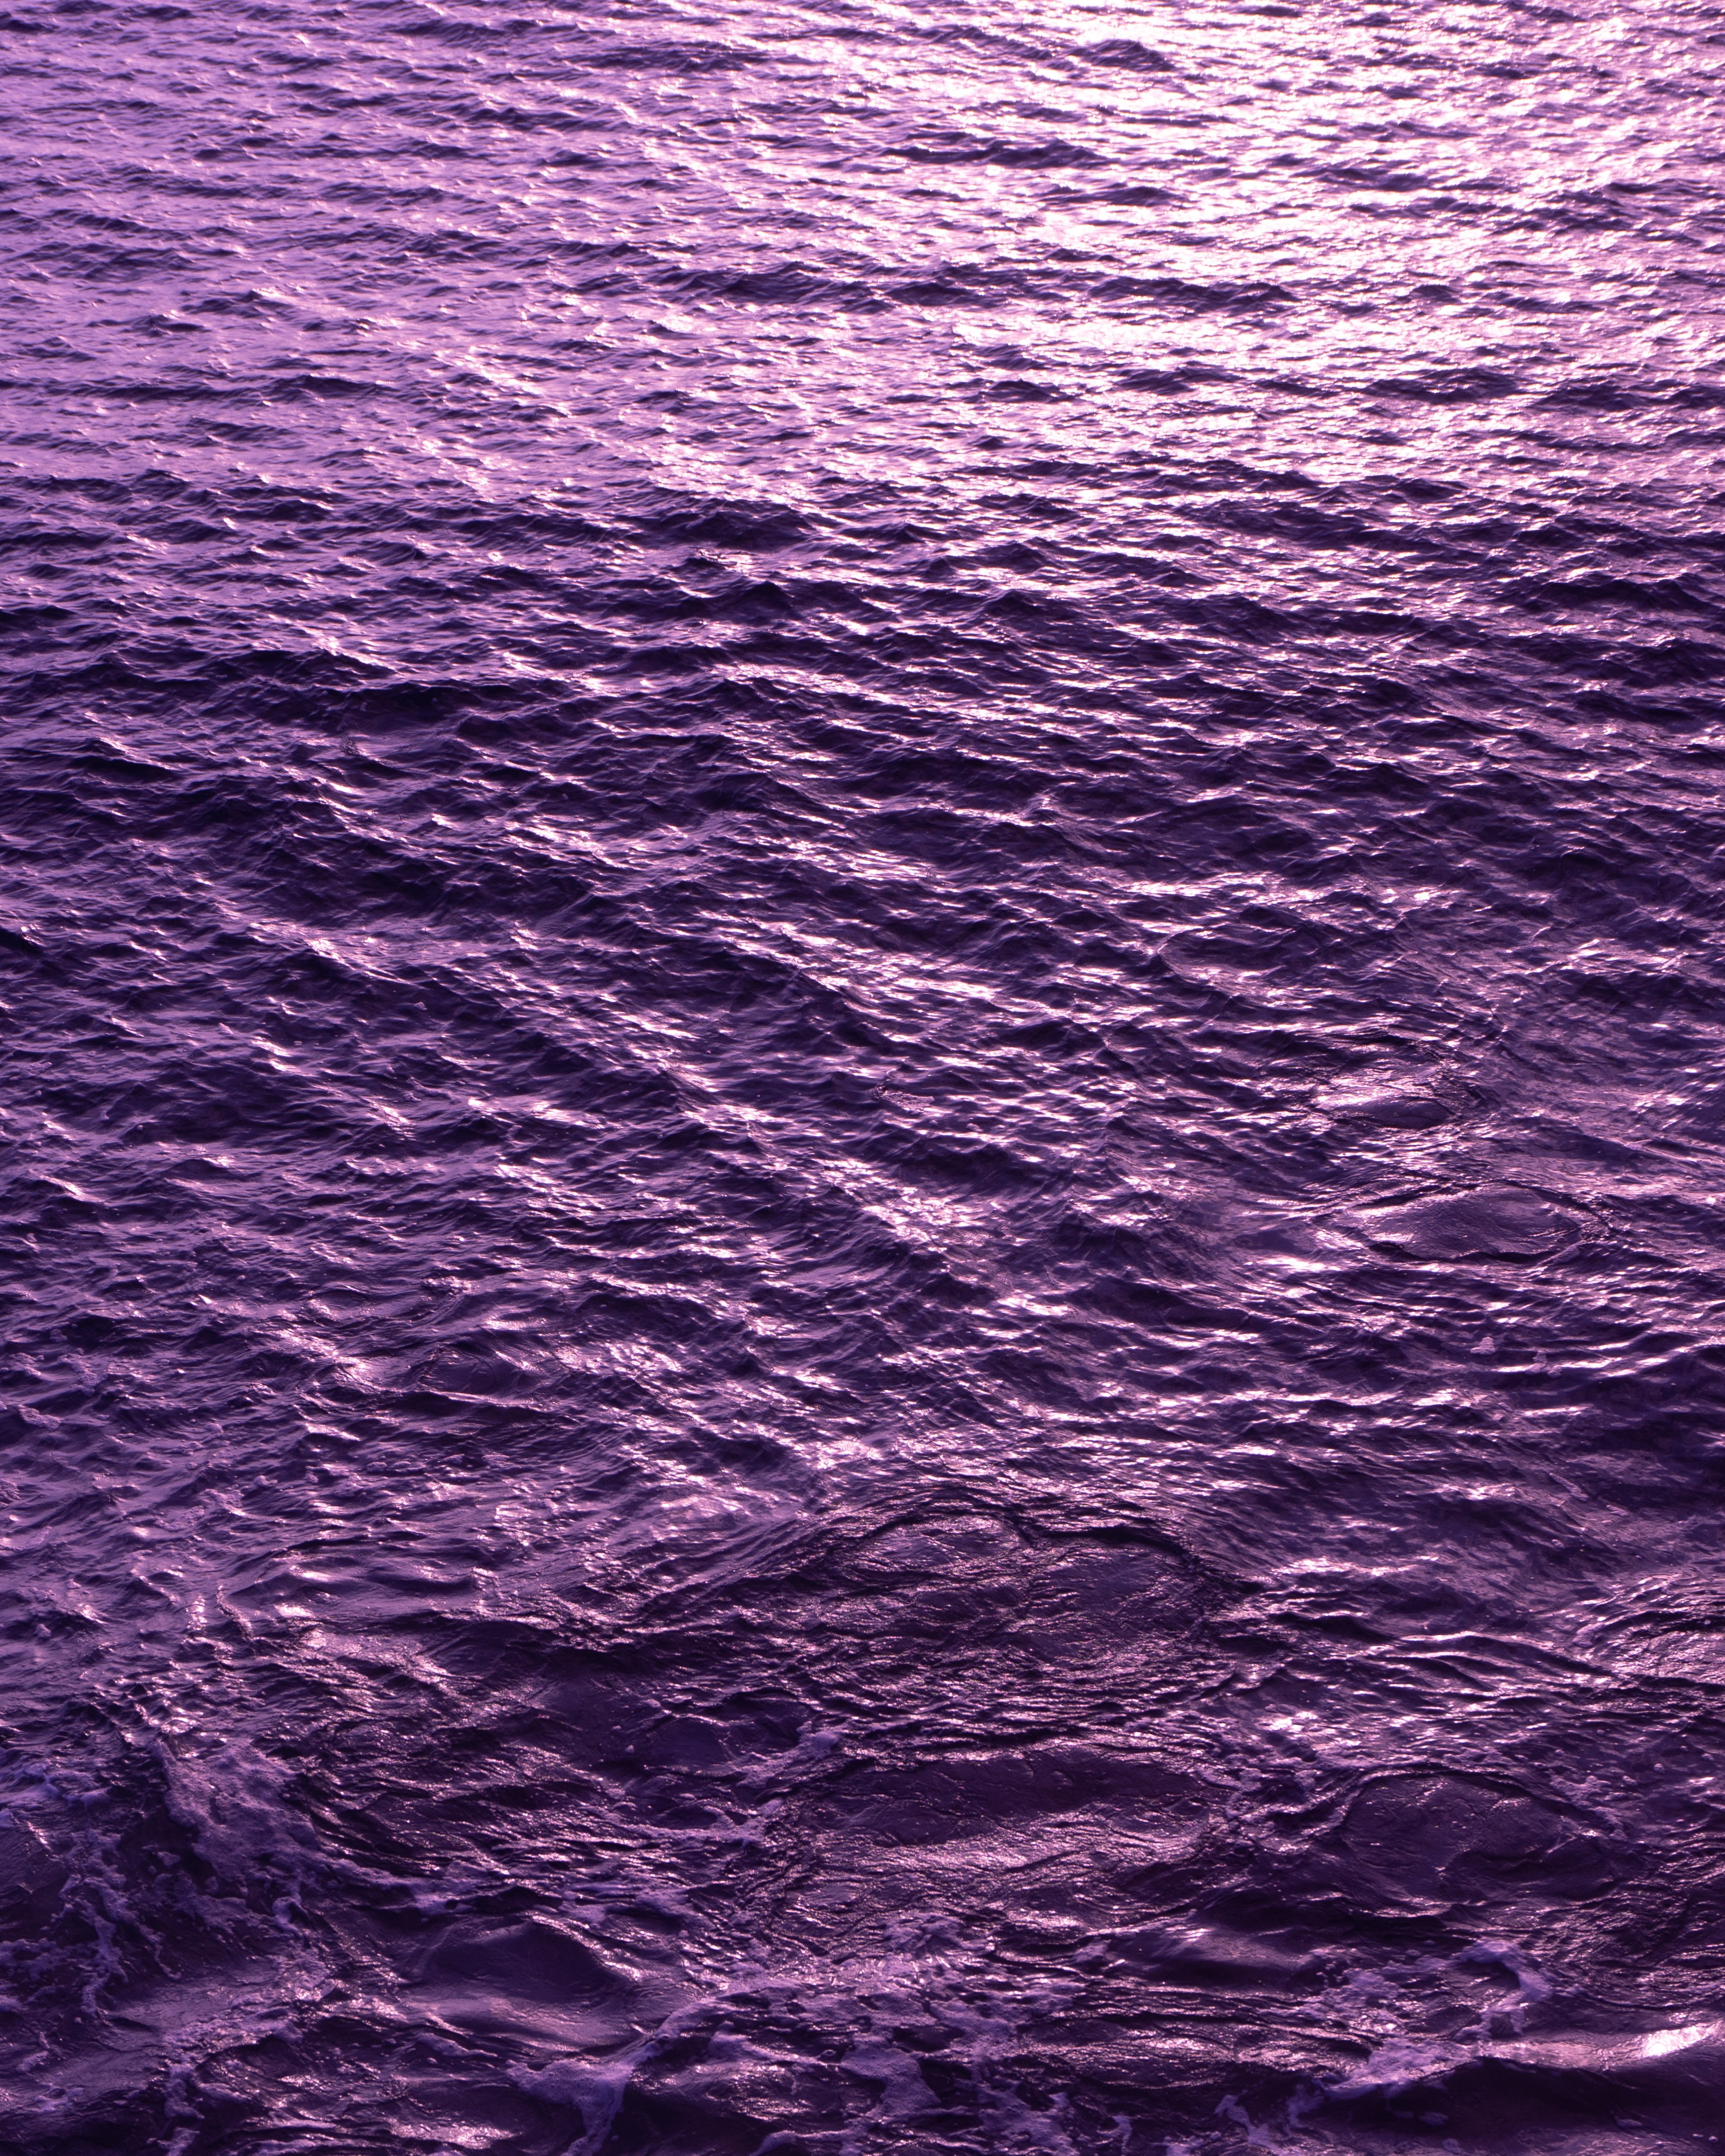 purple, surface, water, nature, waves, violet, ripples, ripple Full HD